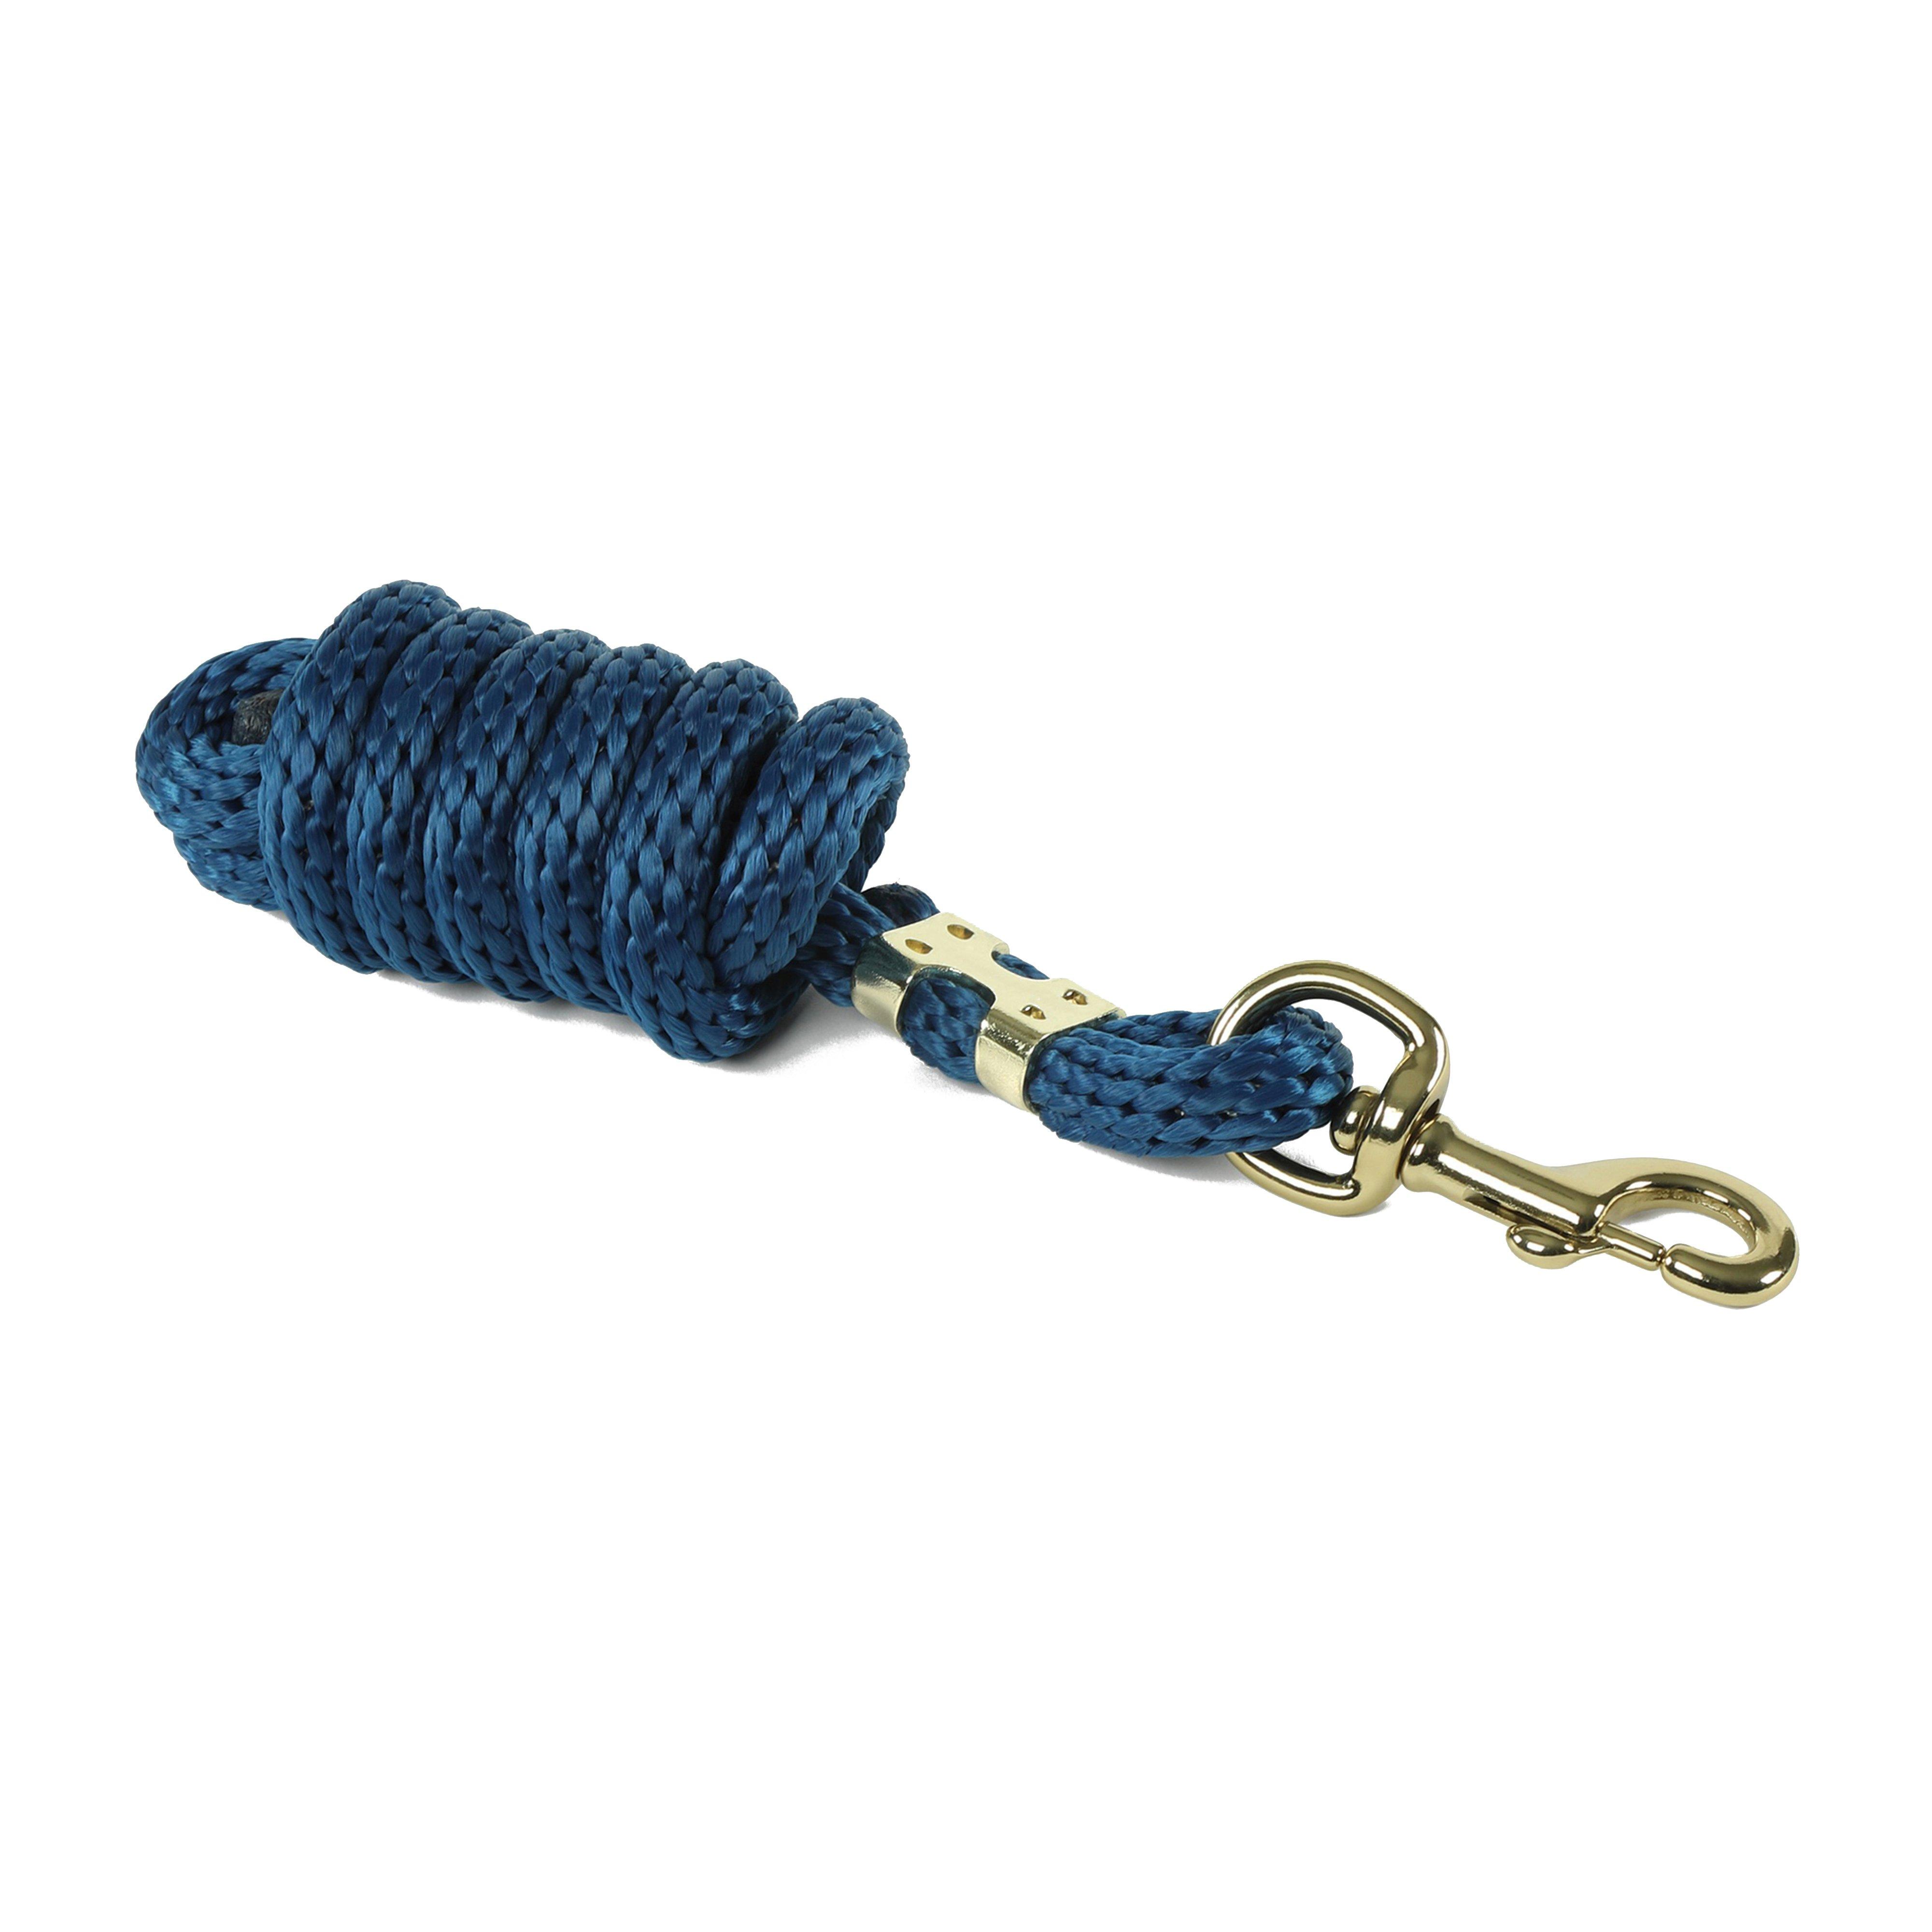 Topaz Leadrope in Navy/Red/Turquoise